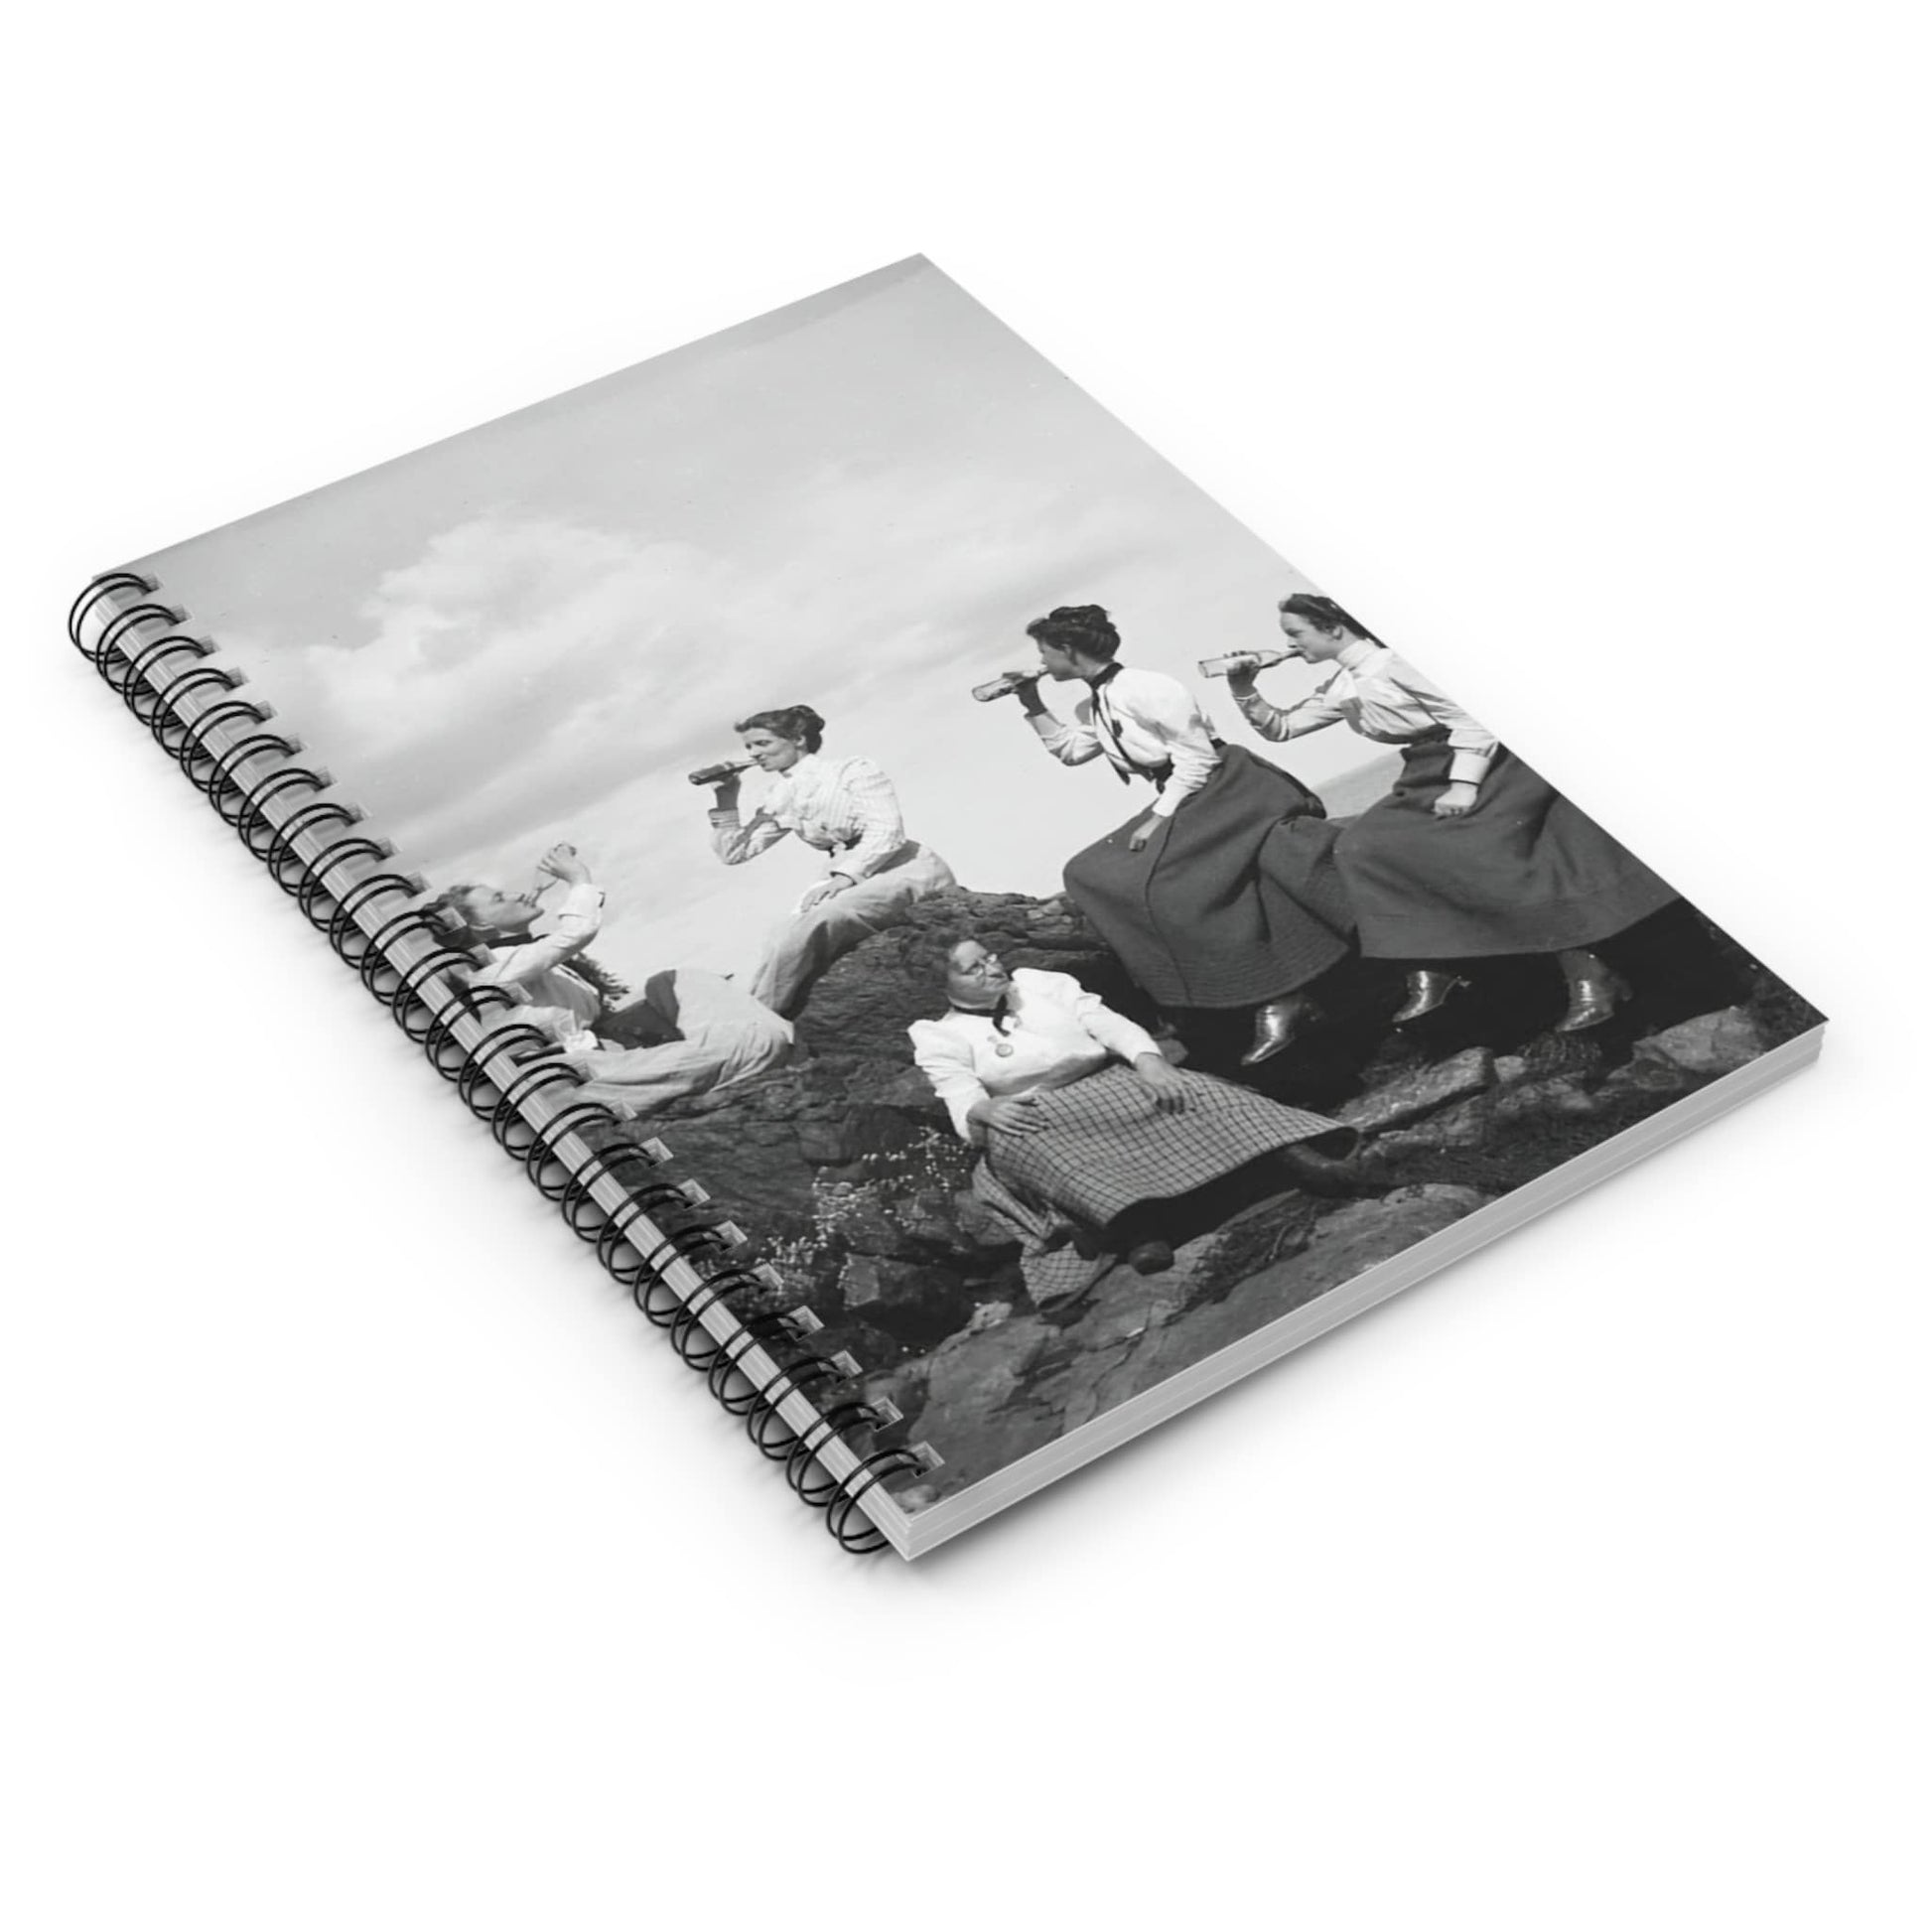 Fun College Spiral Notebook Laying Flat on White Surface